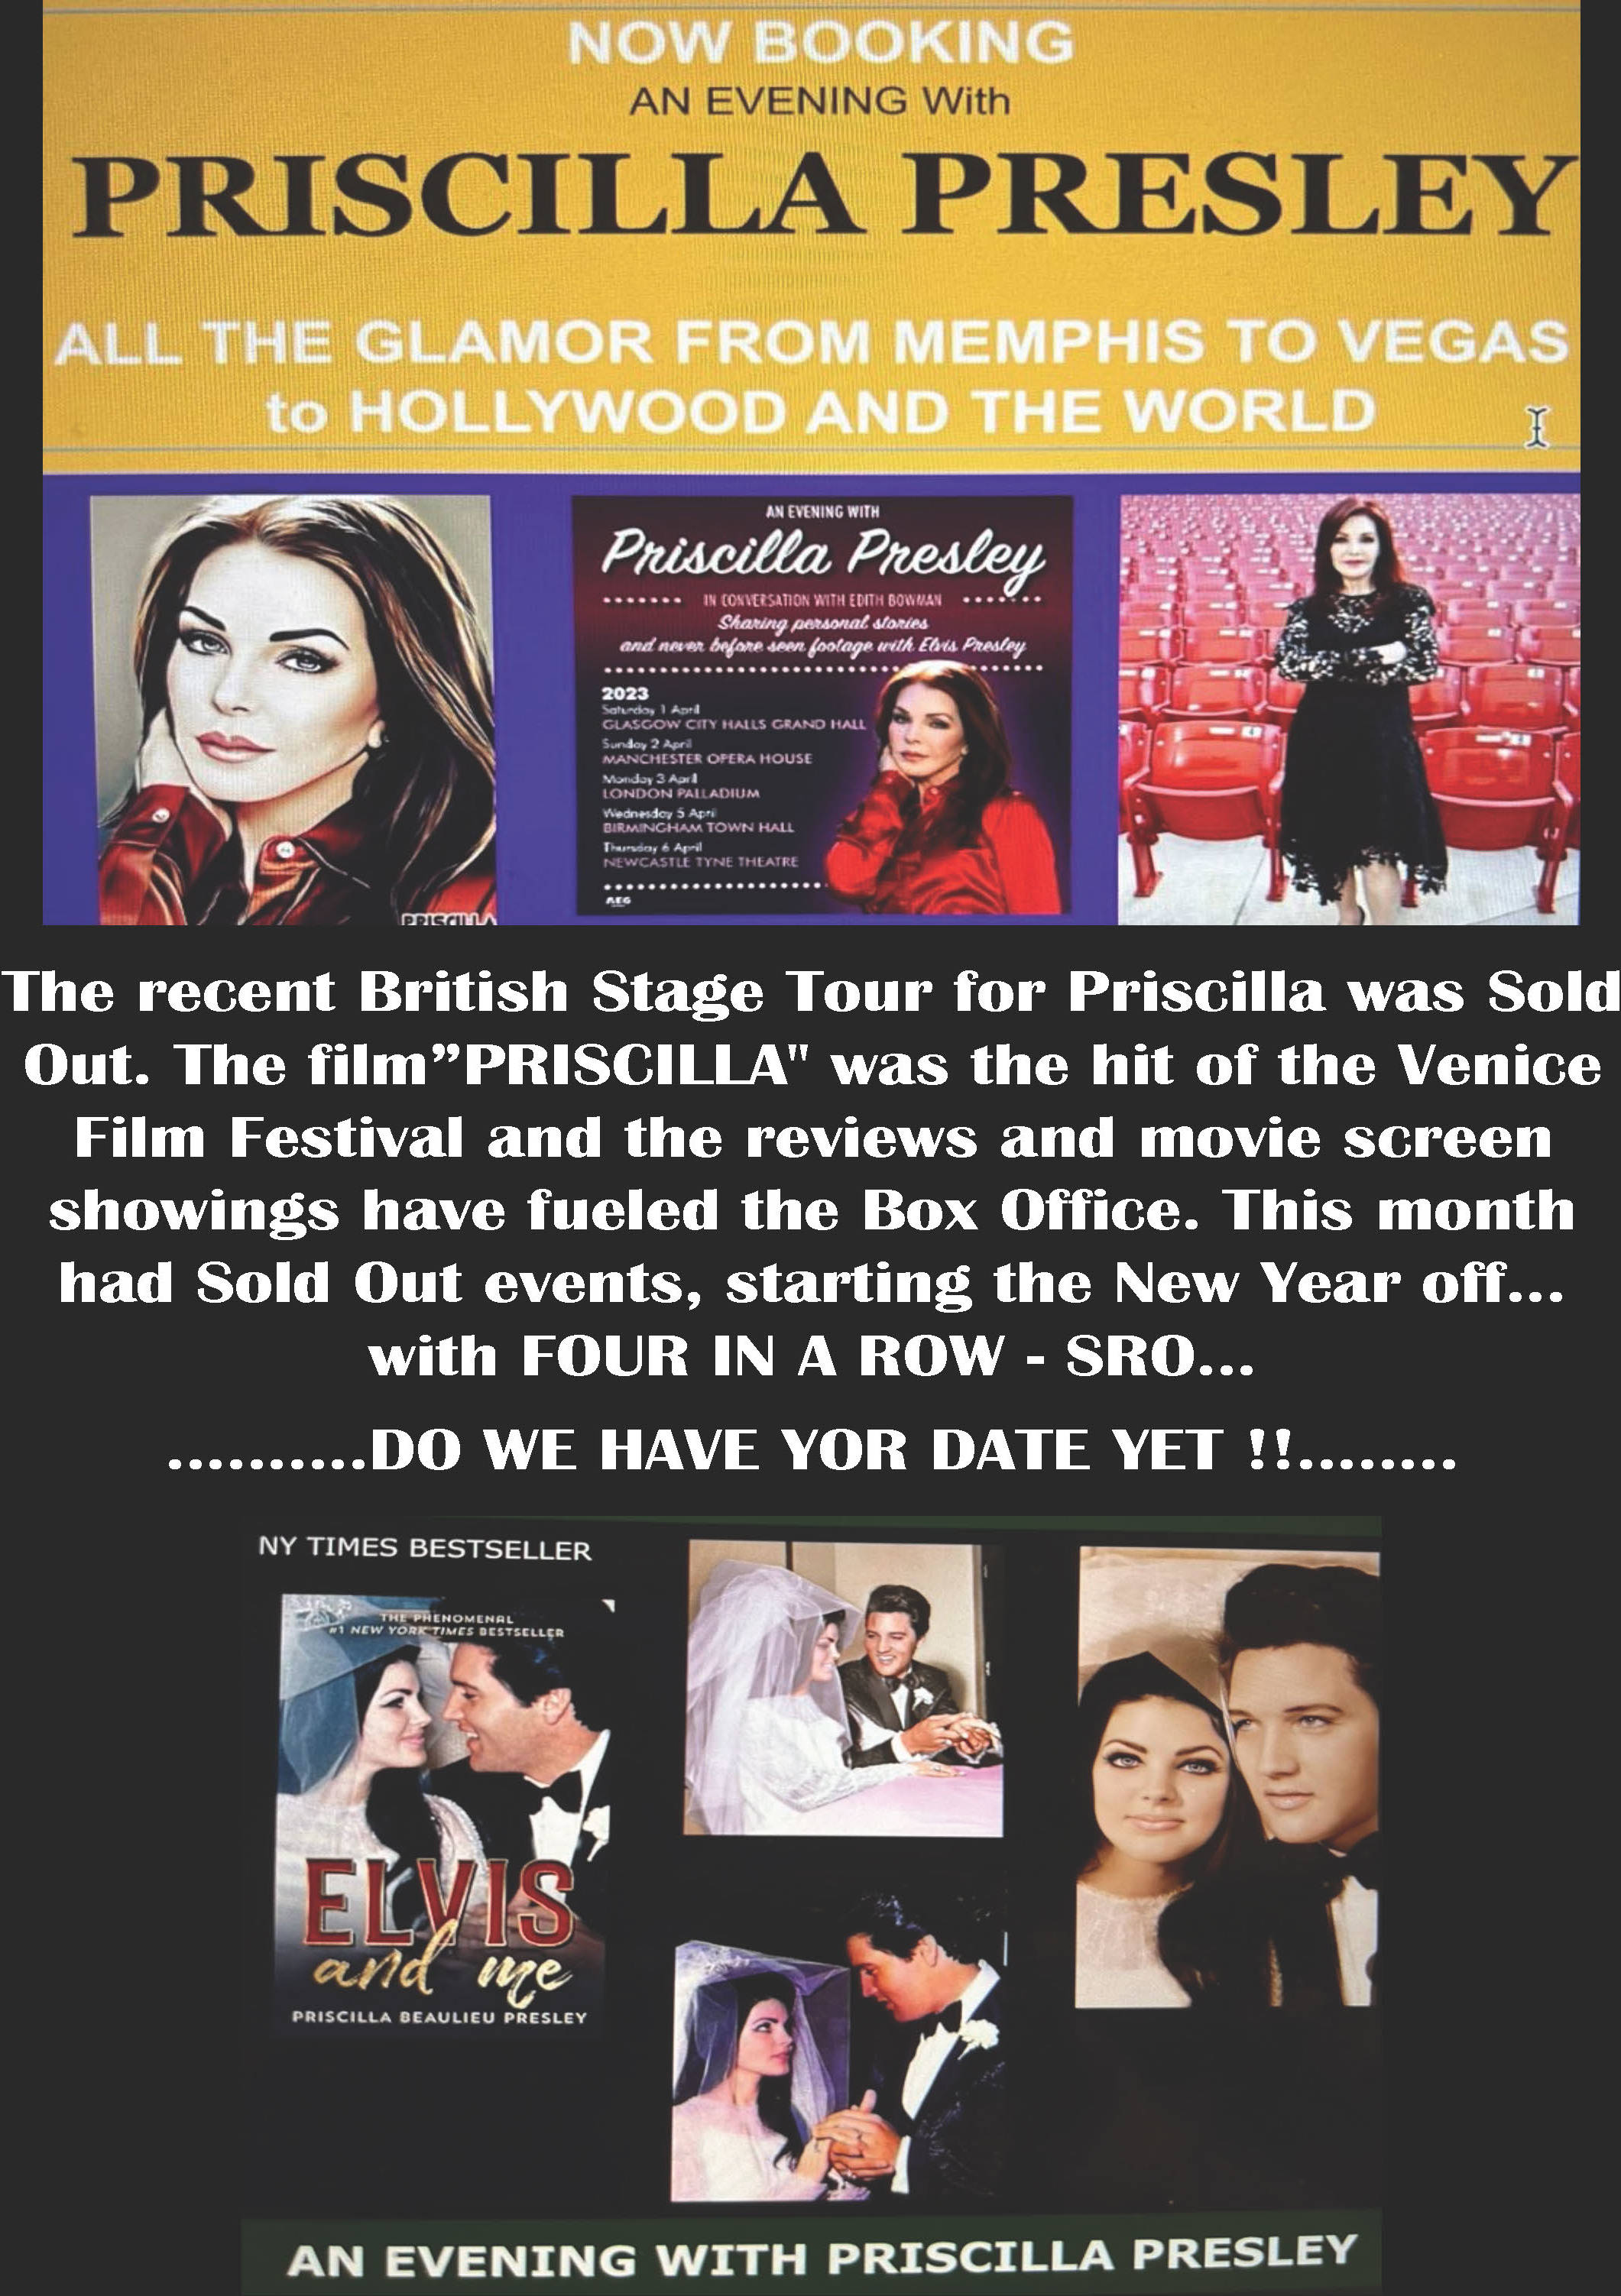 Now booking an evening with Priscilla Presley; All the glamor from Memphis to Vegas to Hollywood and the world